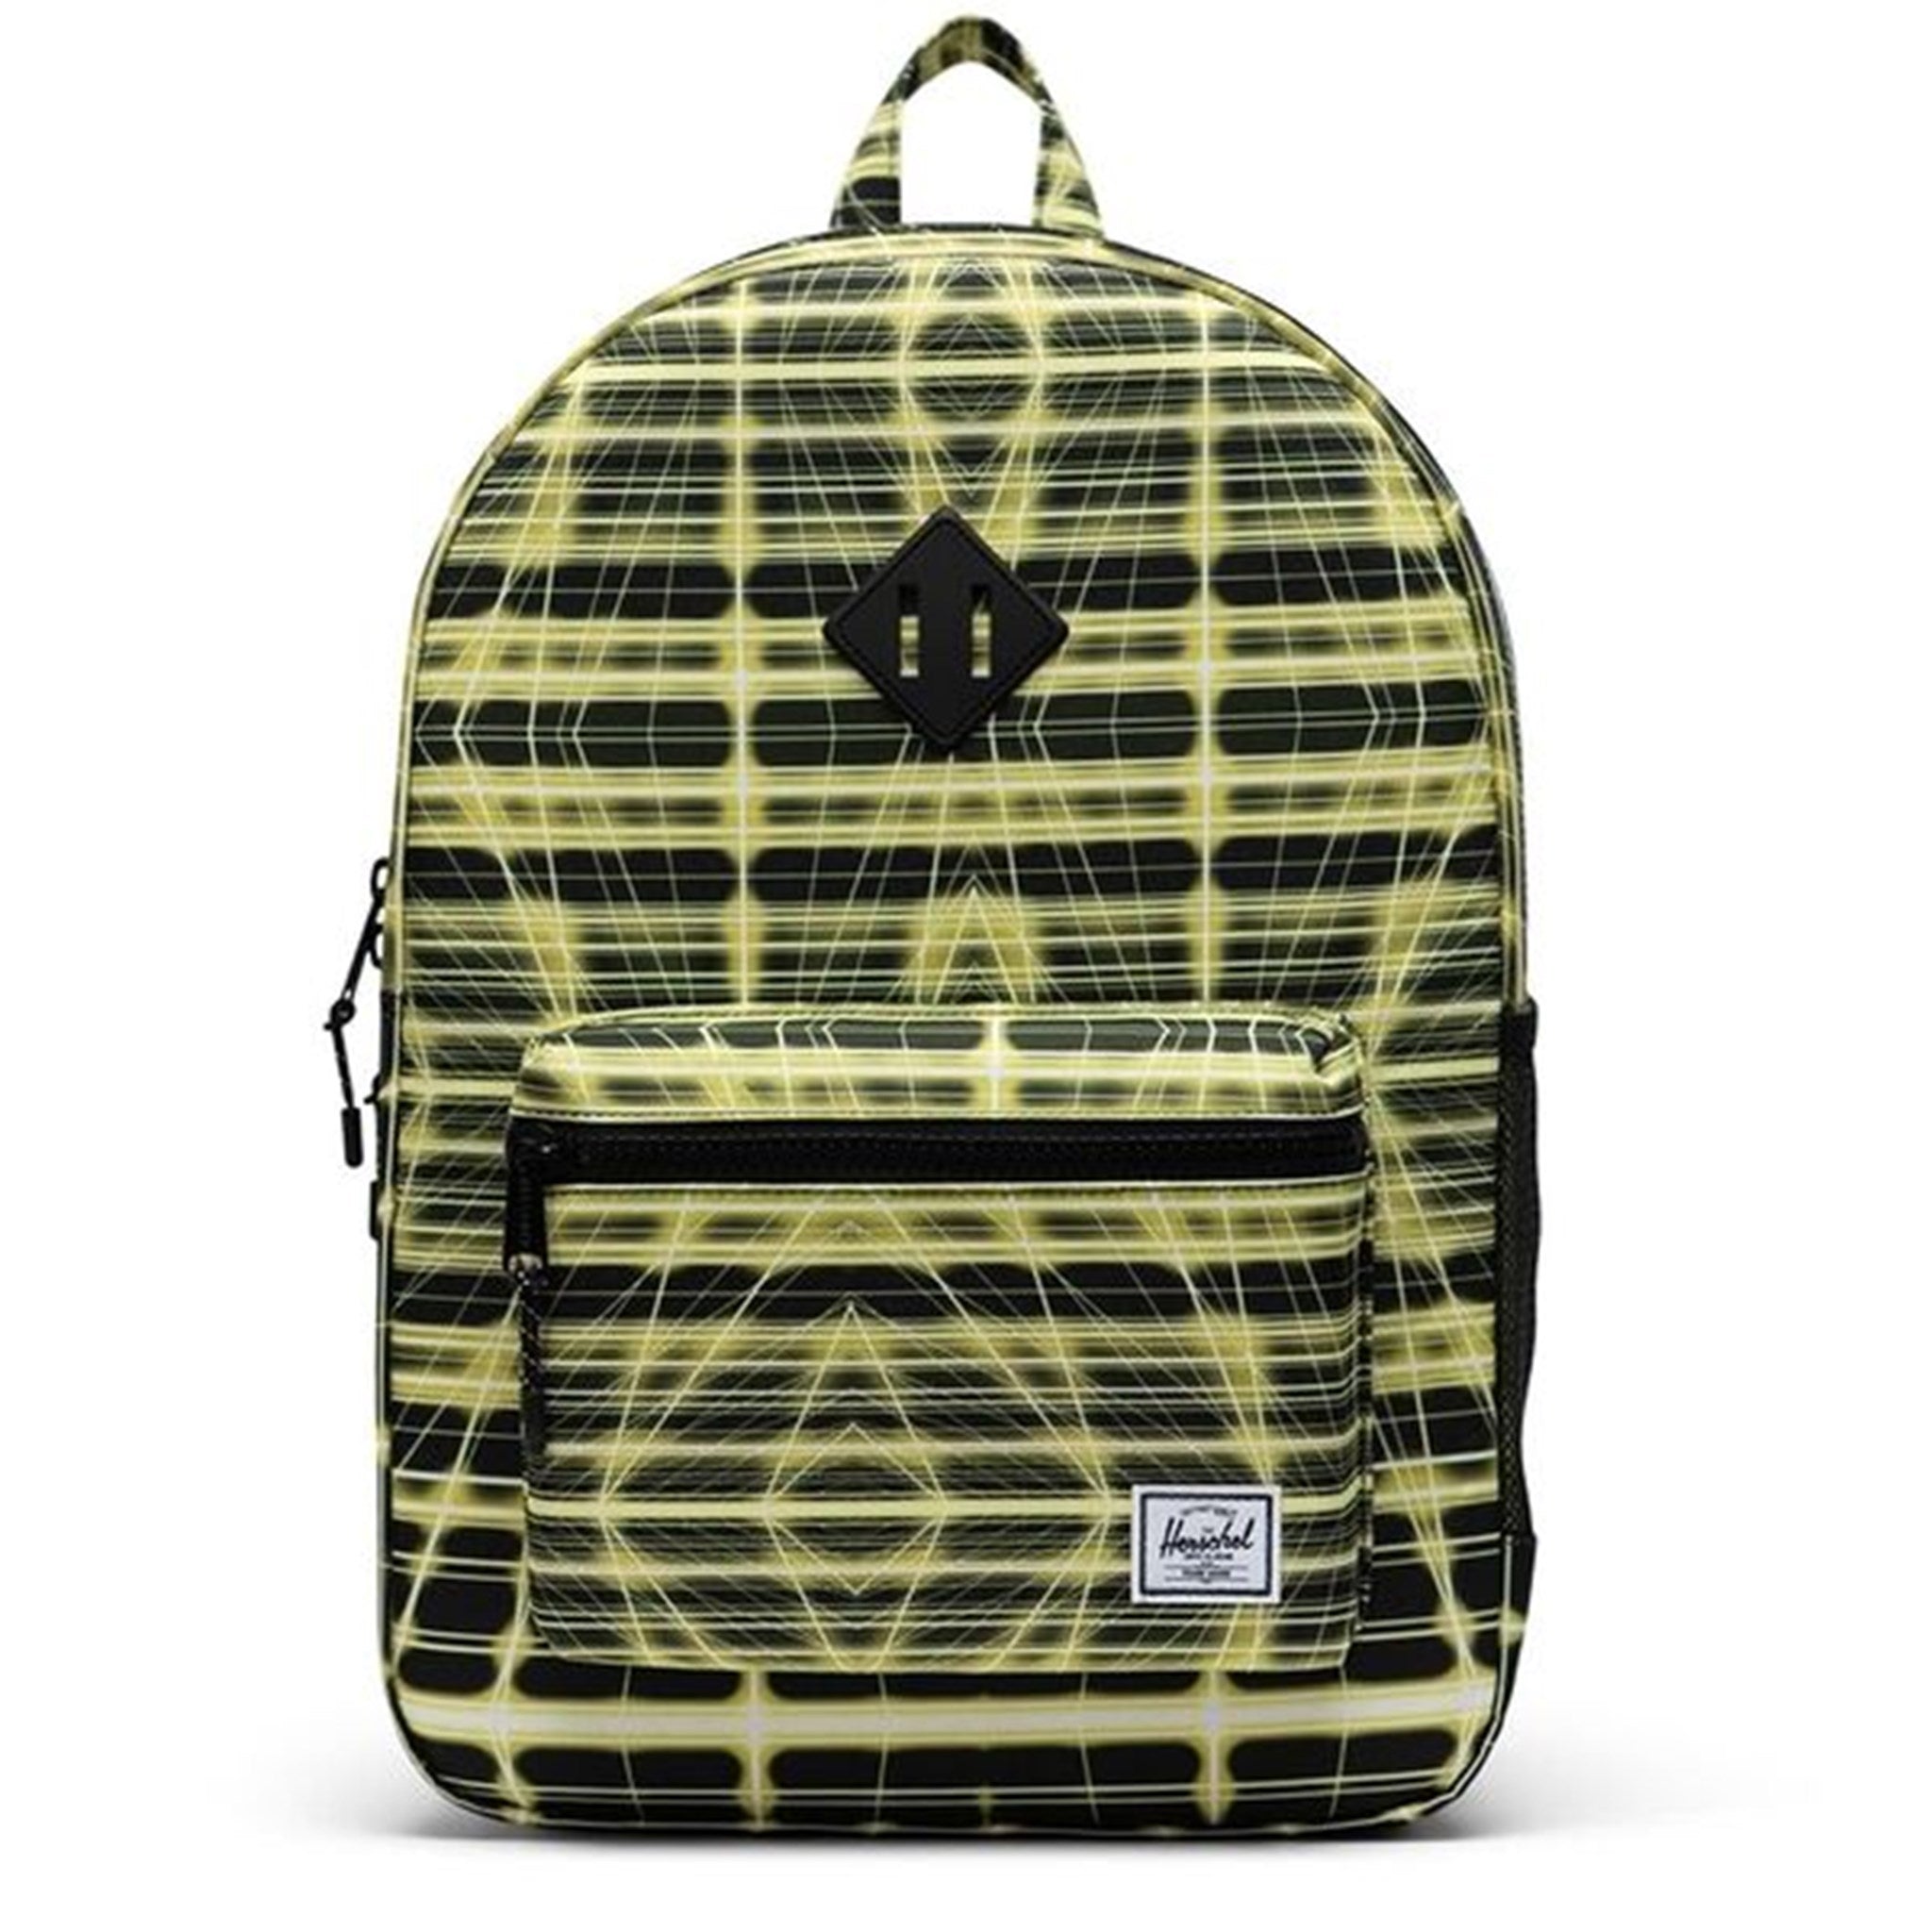 Herschel Heritage Youth XL Backpack Neon Grid Highlight